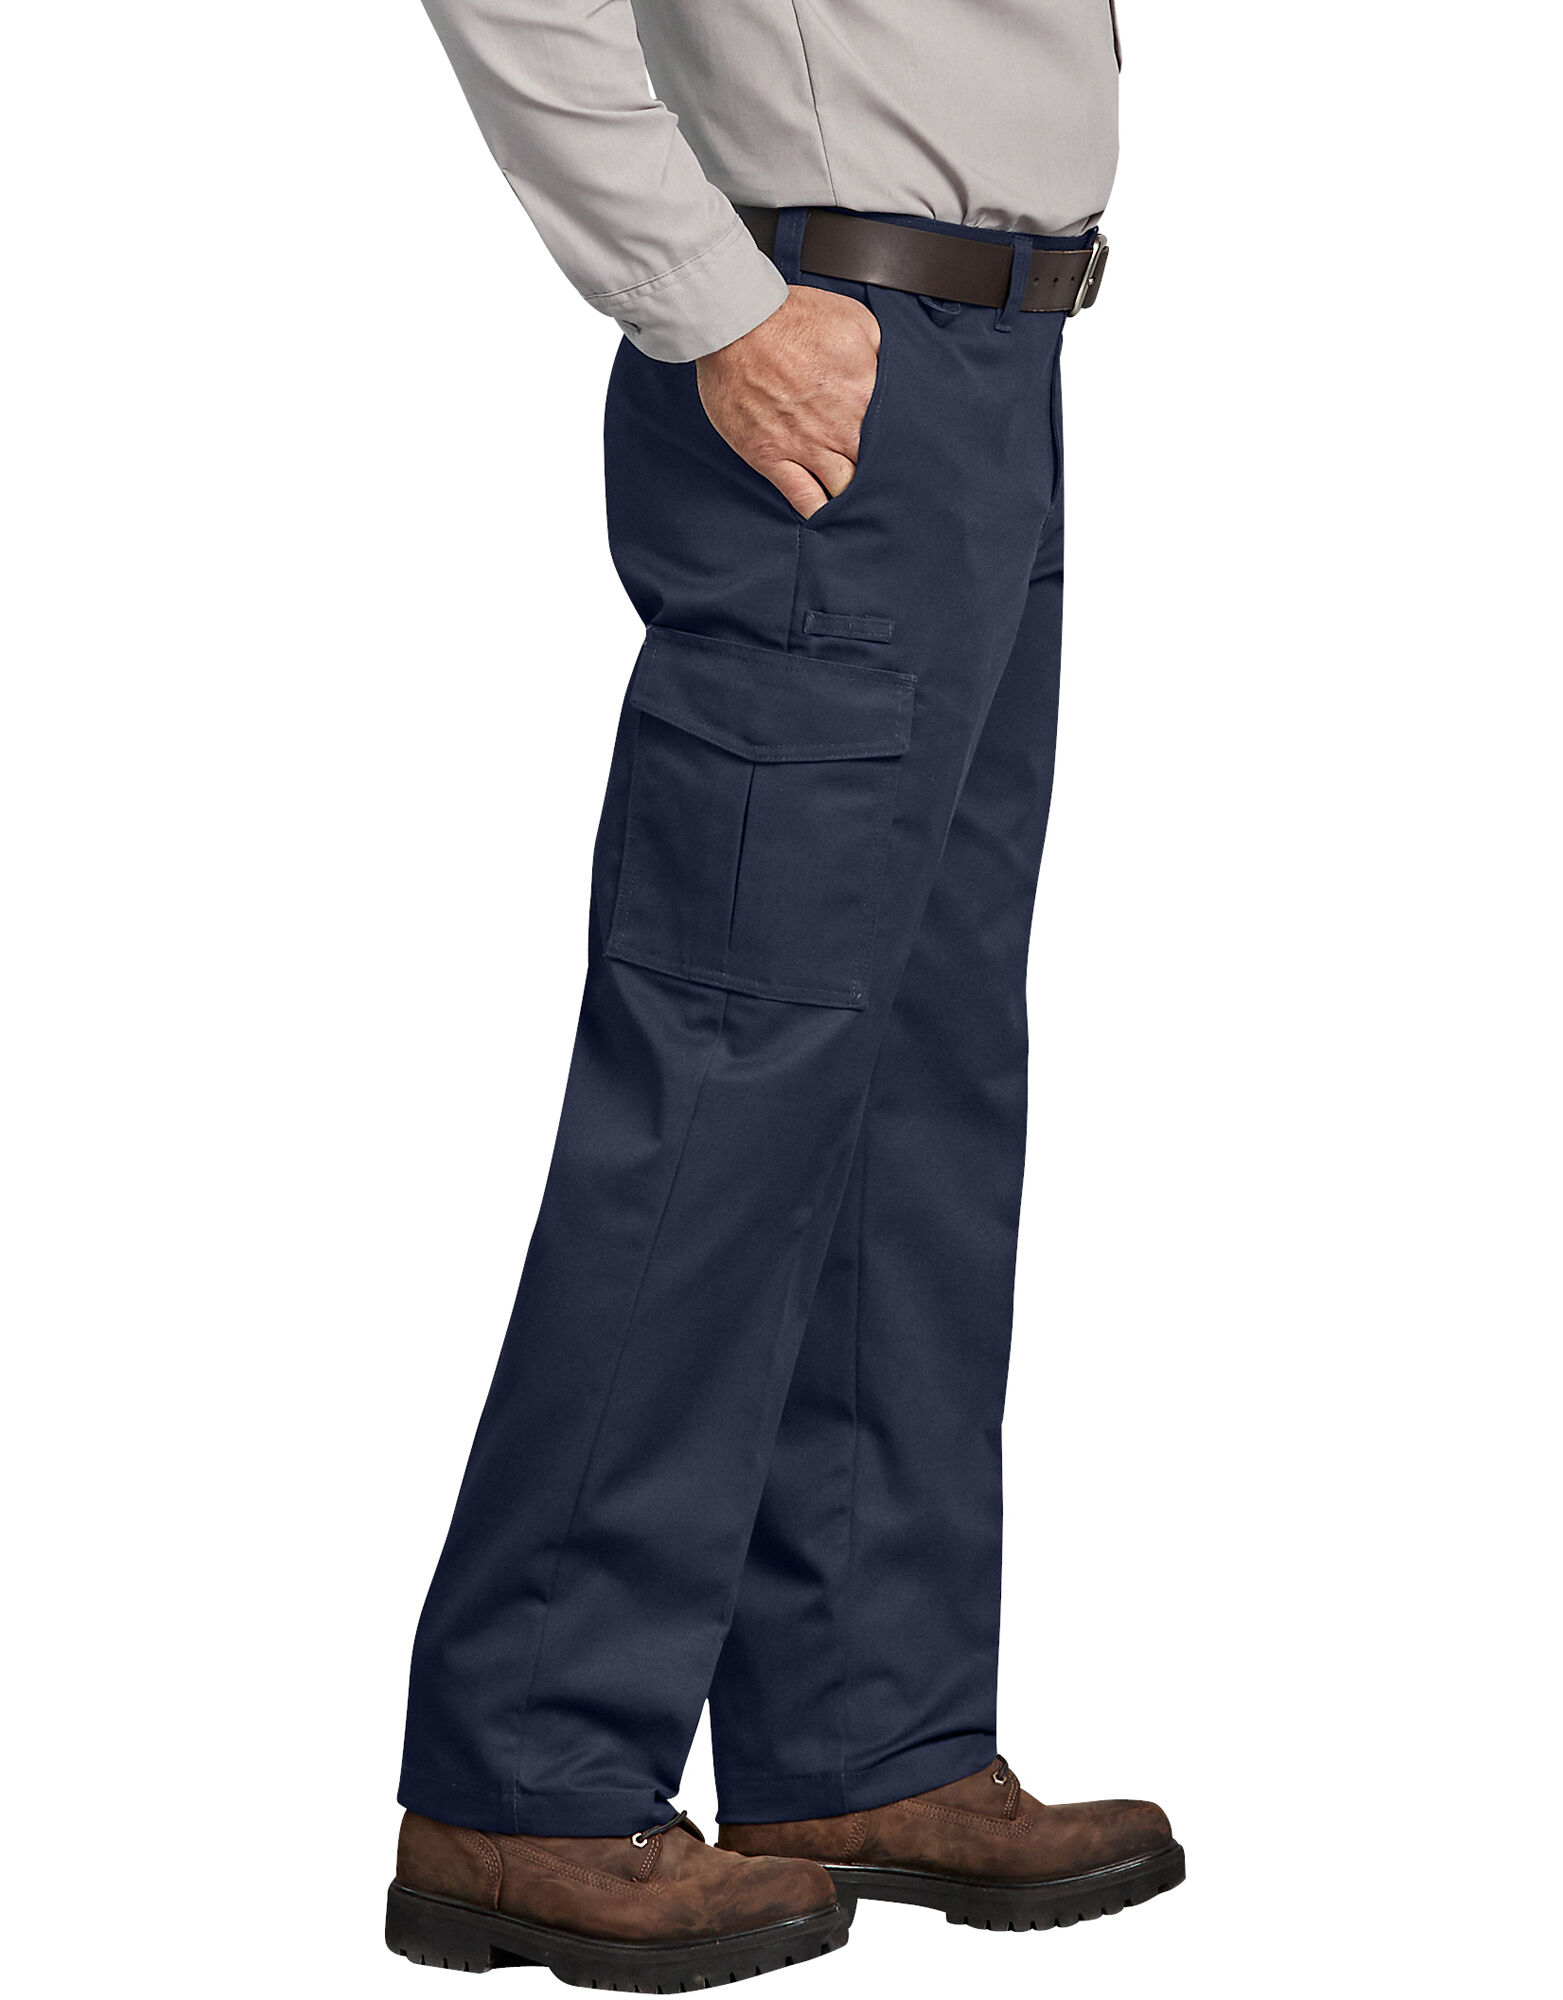 industrial relaxed fit straight leg cargo pants navy blue